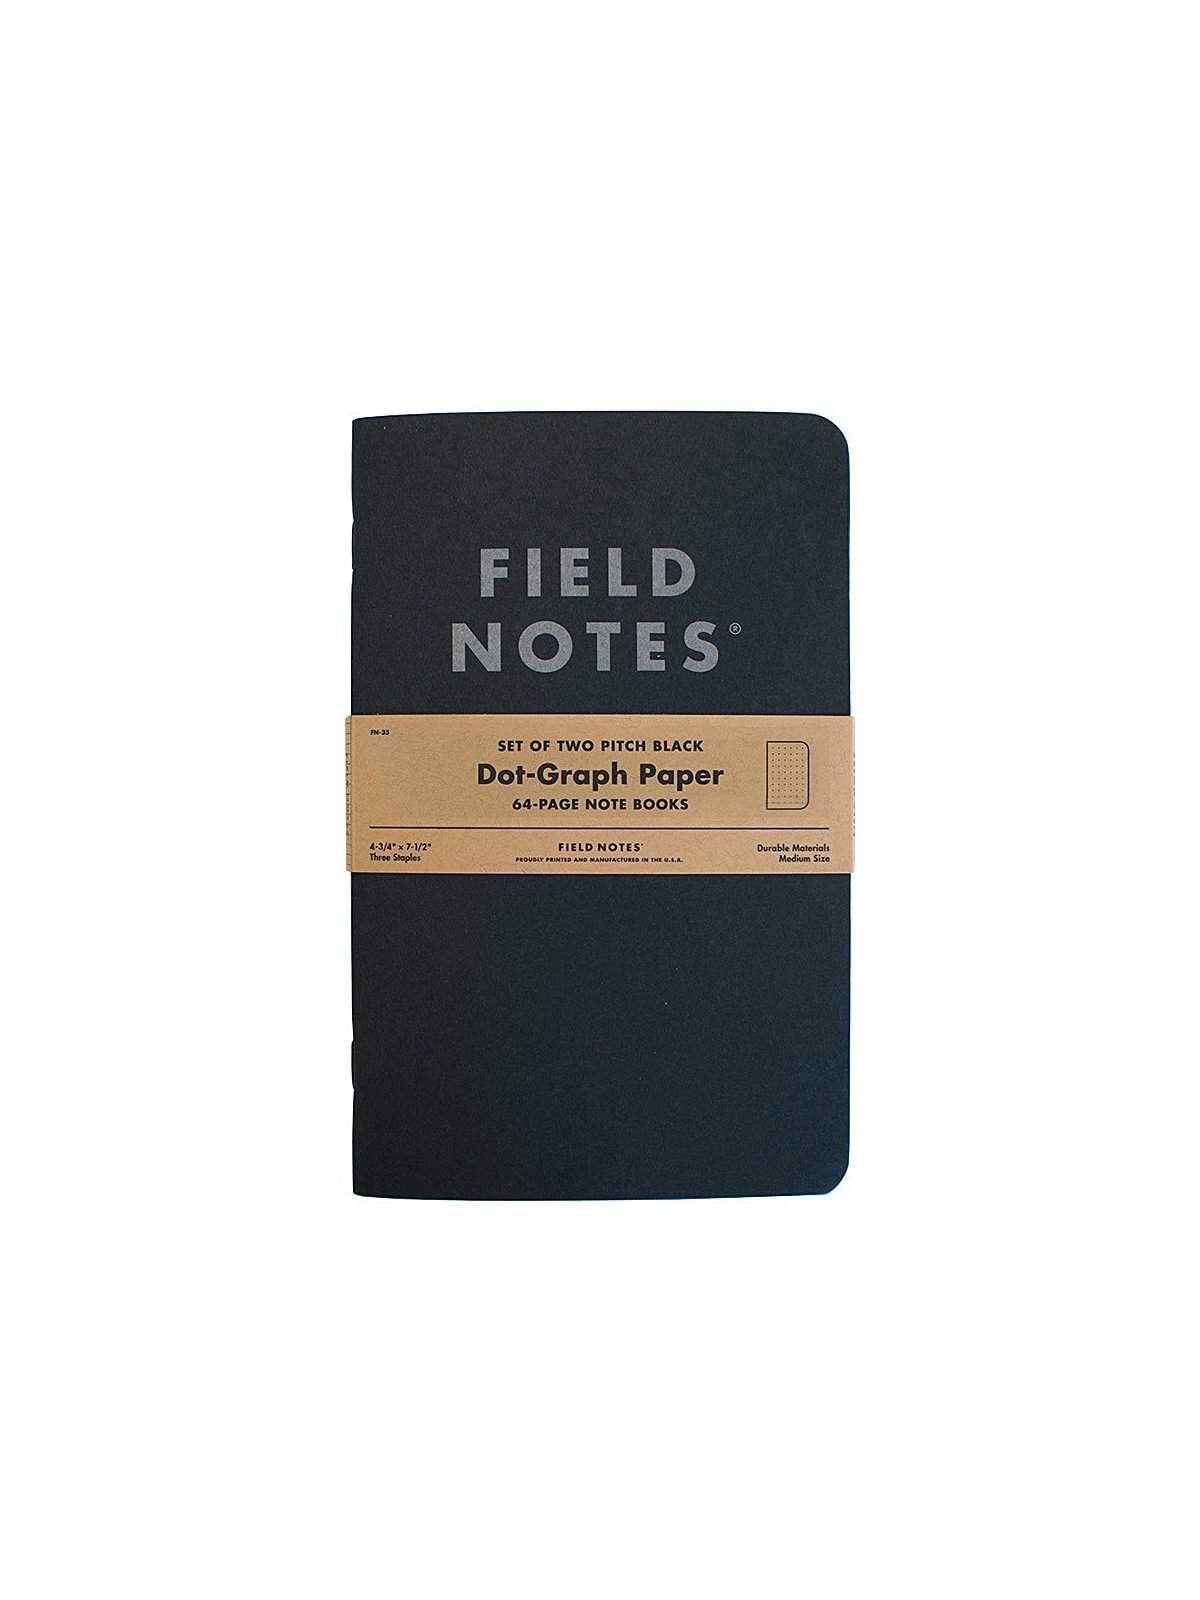 Field Notes Pitch Black Note Book 2 Pack Dot Graph Paper - MORE by Morello Indonesia